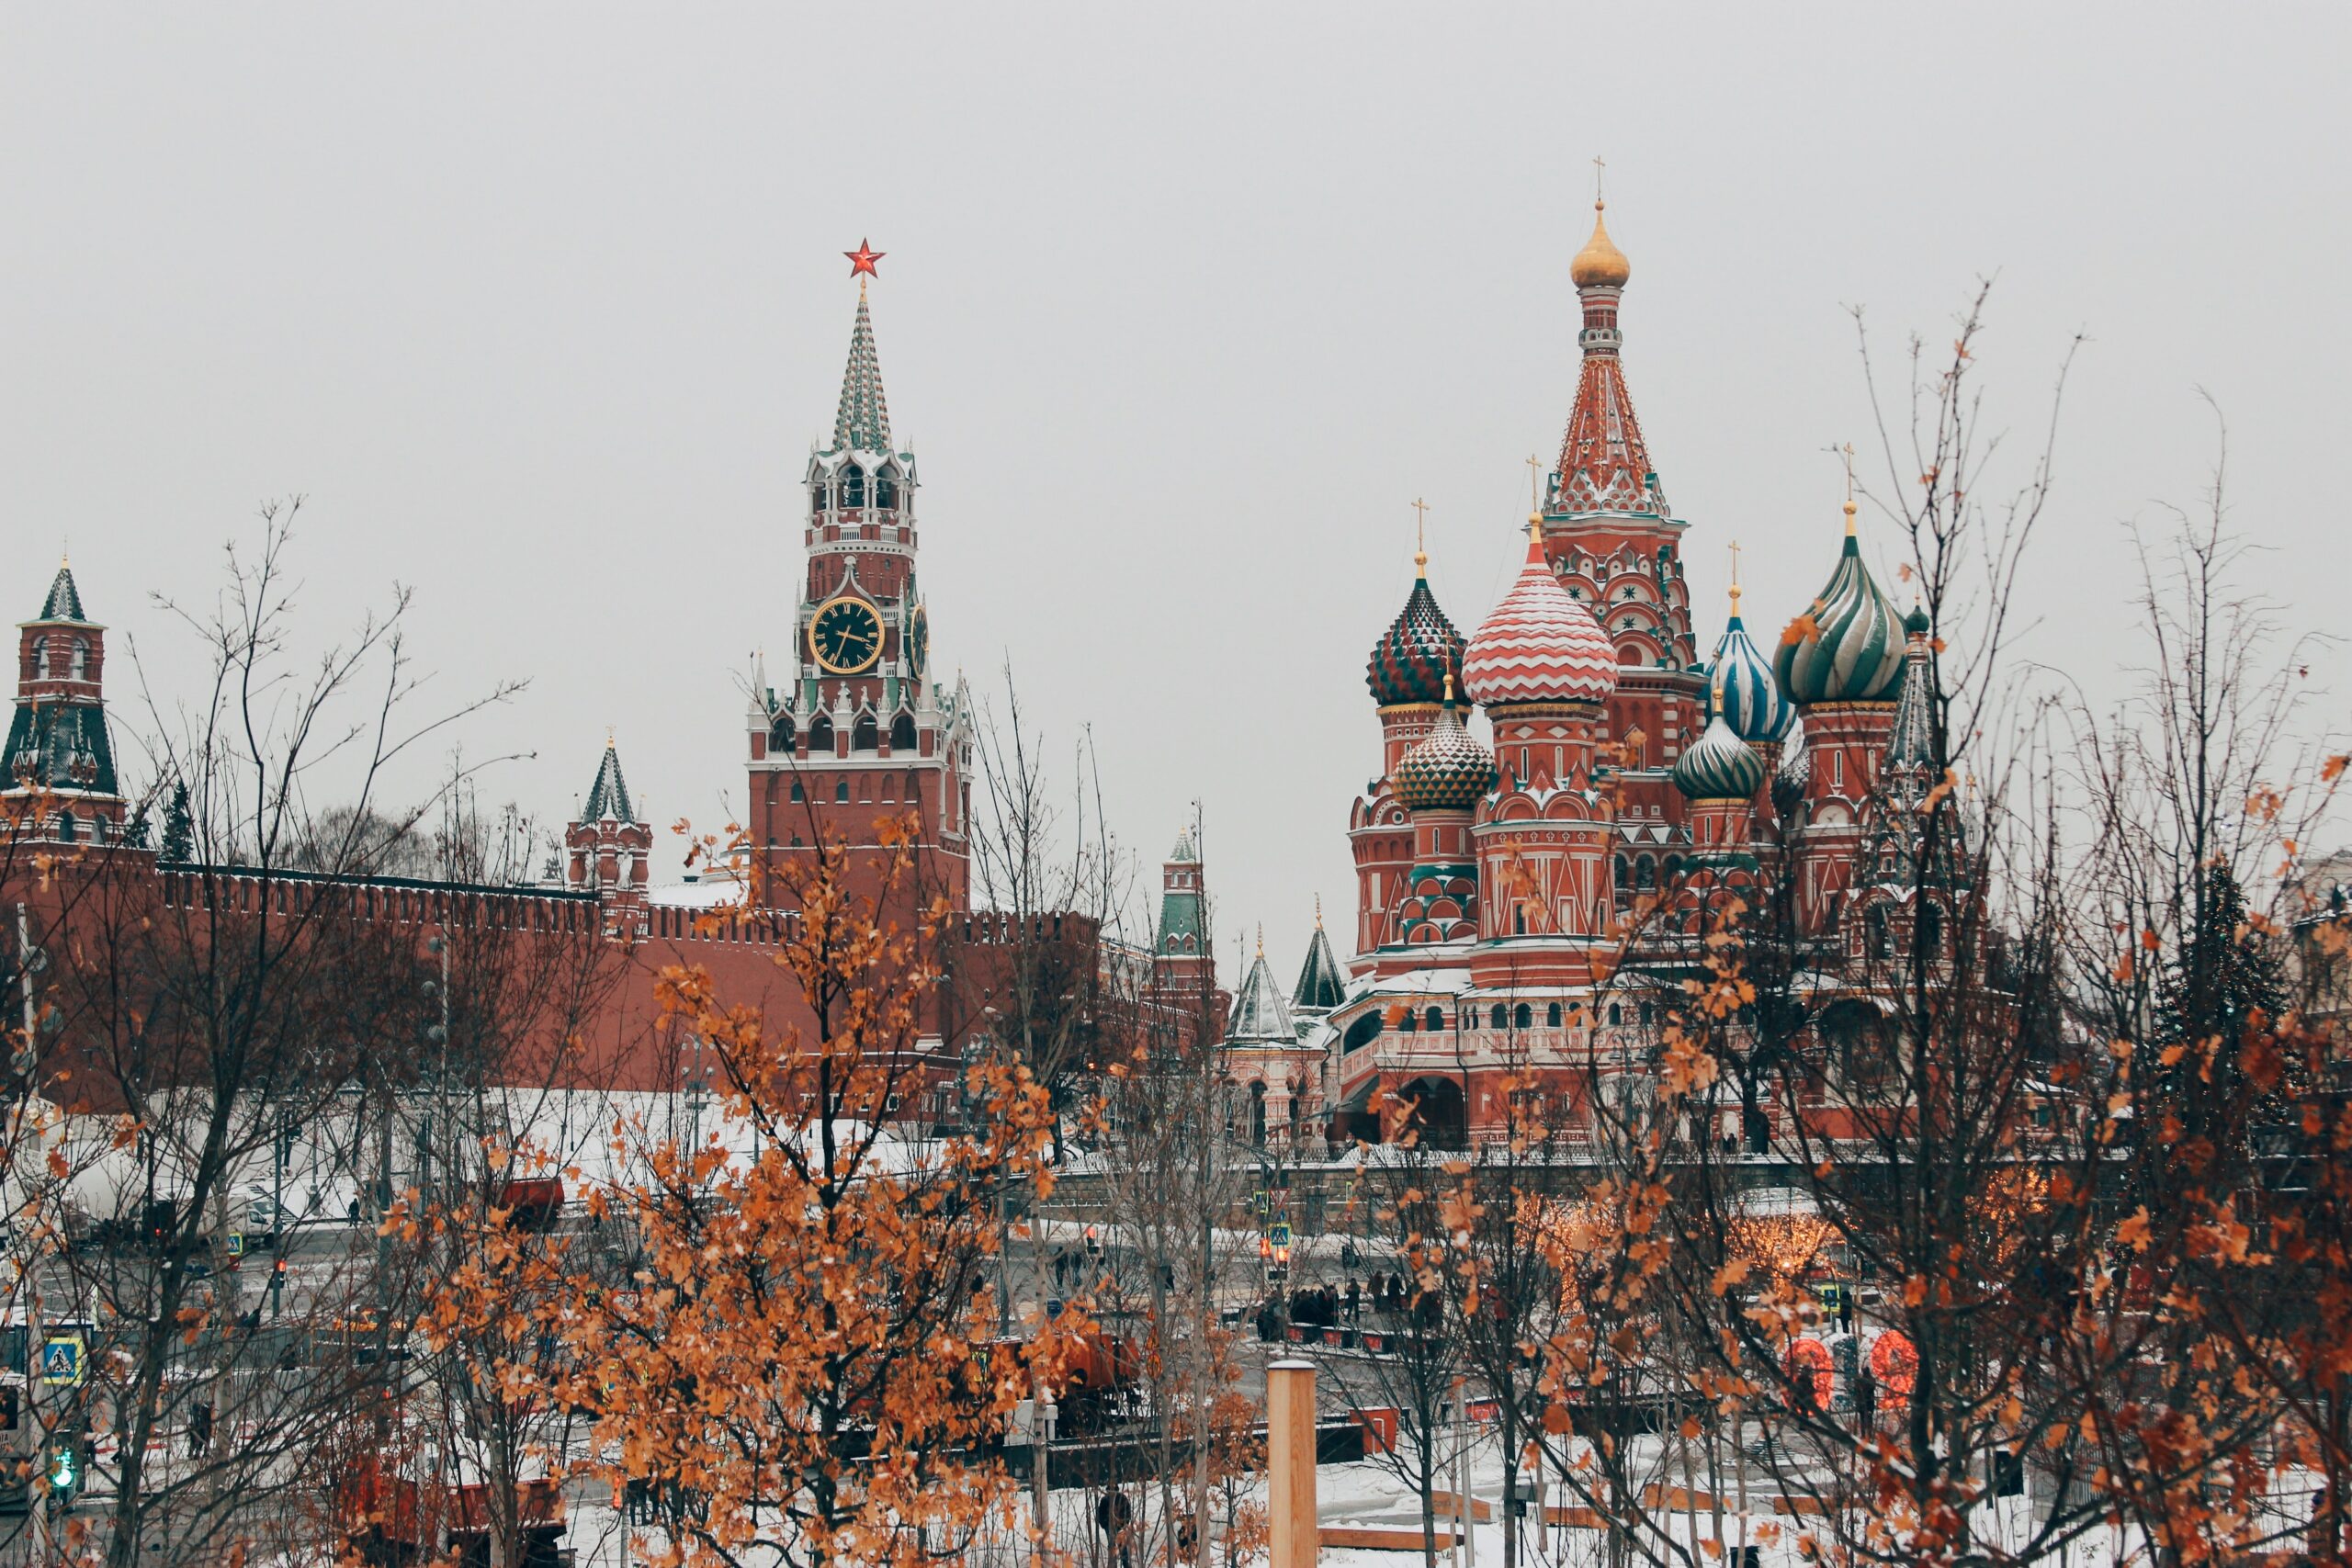 St. Basil's Cathedral in Winter